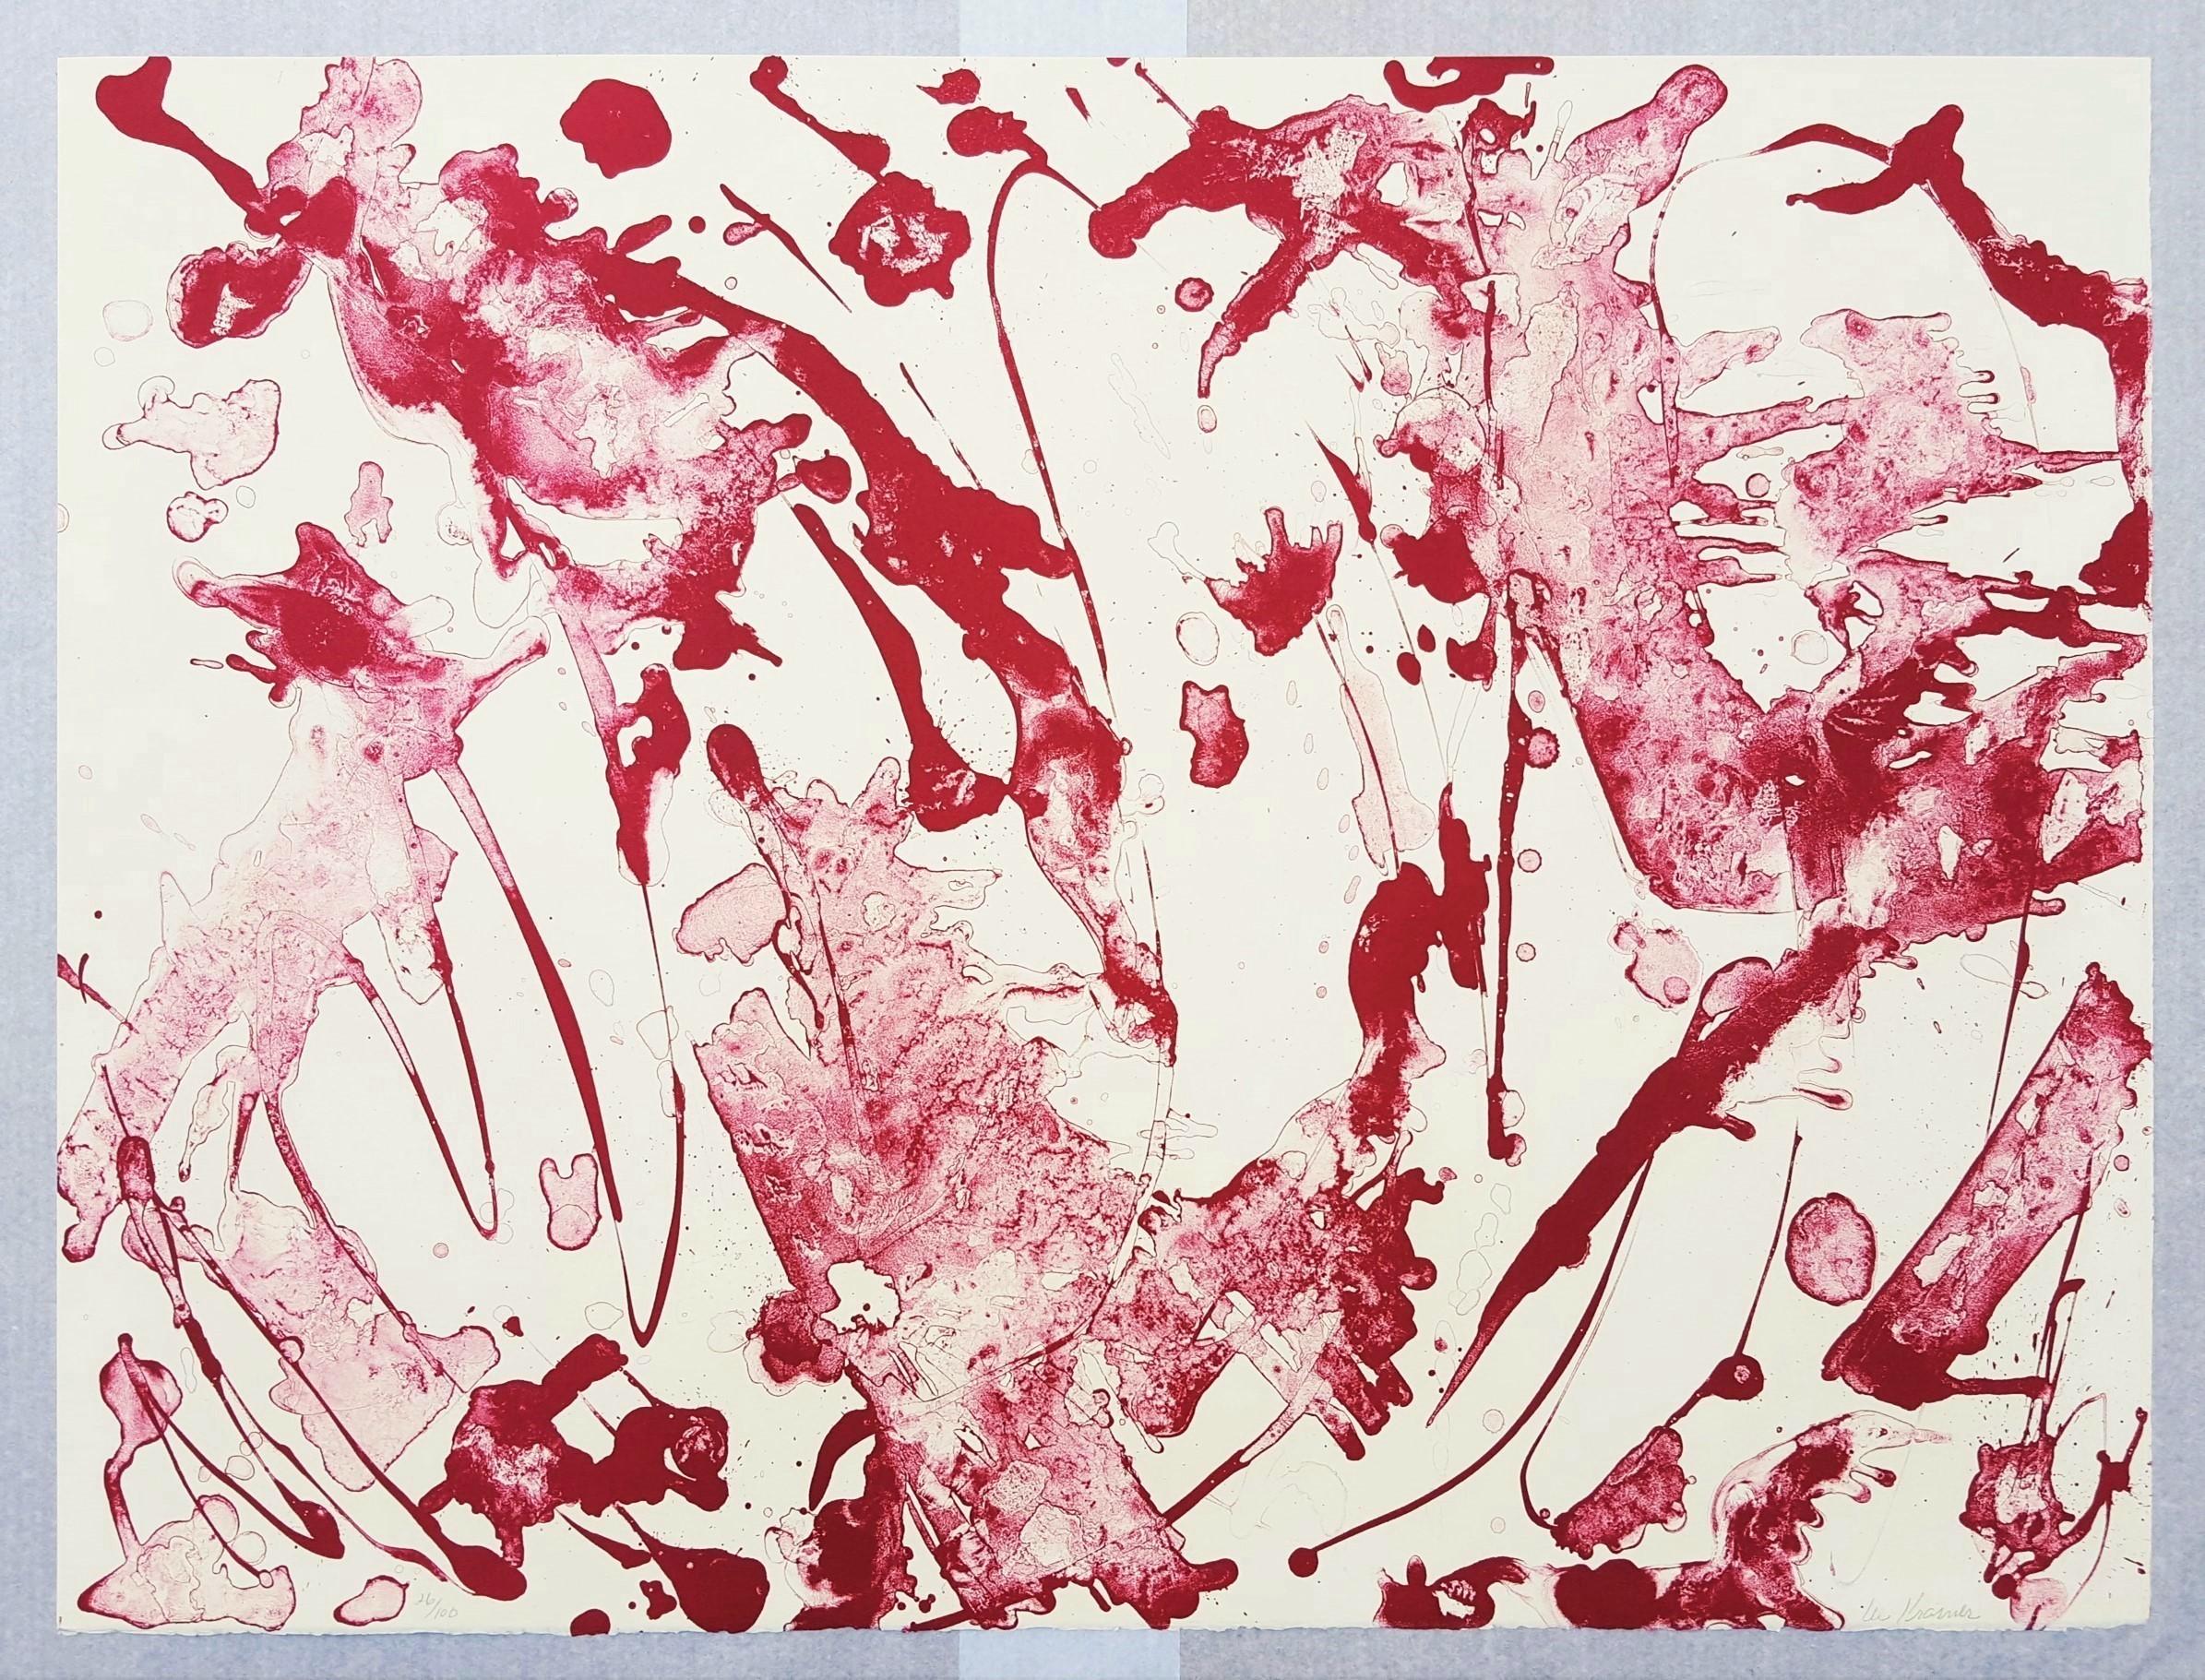 Pink Stone (also called Rose Stone) - Print by Lee Krasner